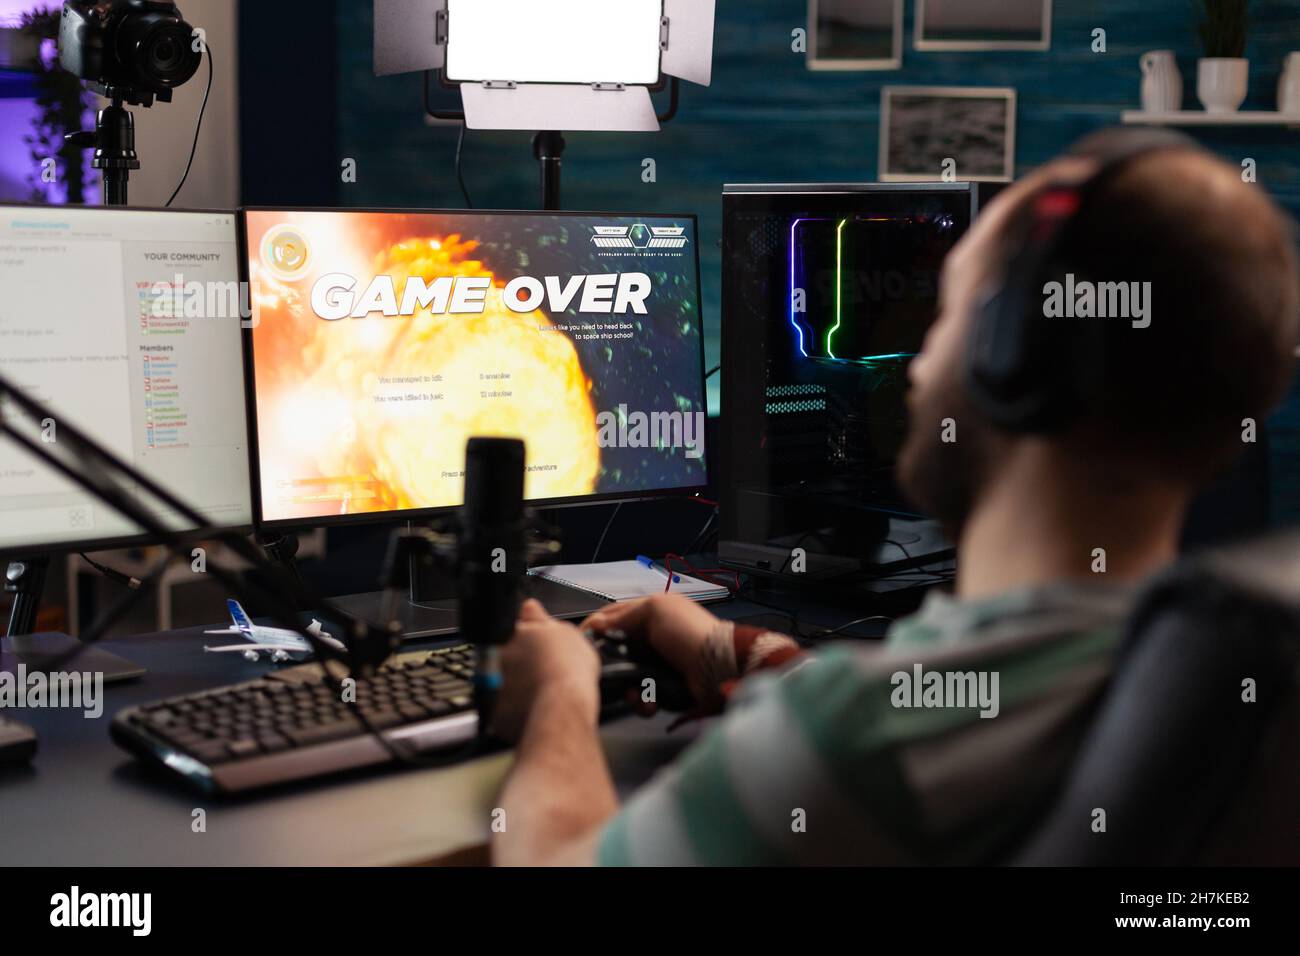 Man streaming video games with microphone and losing on computer. Gamer looking at monitors with live stream chat and online game, playing and broadcasting gameplay with headphones. Stock Photo